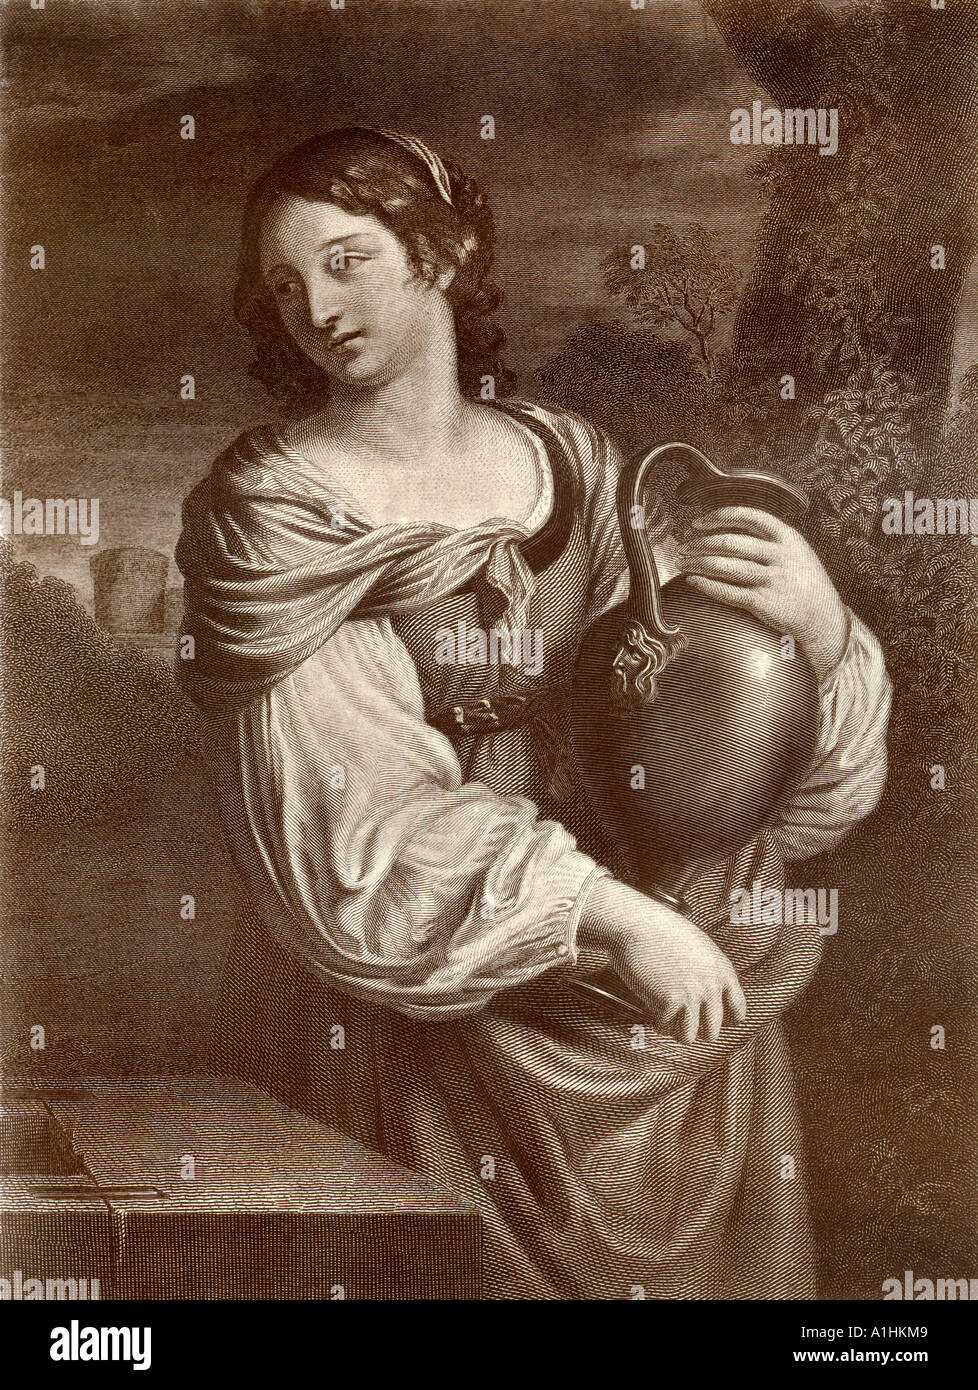 The Woman of Samaria From an edition of John Browns Self Interpreting Bible first published in 1778 Stock Photo